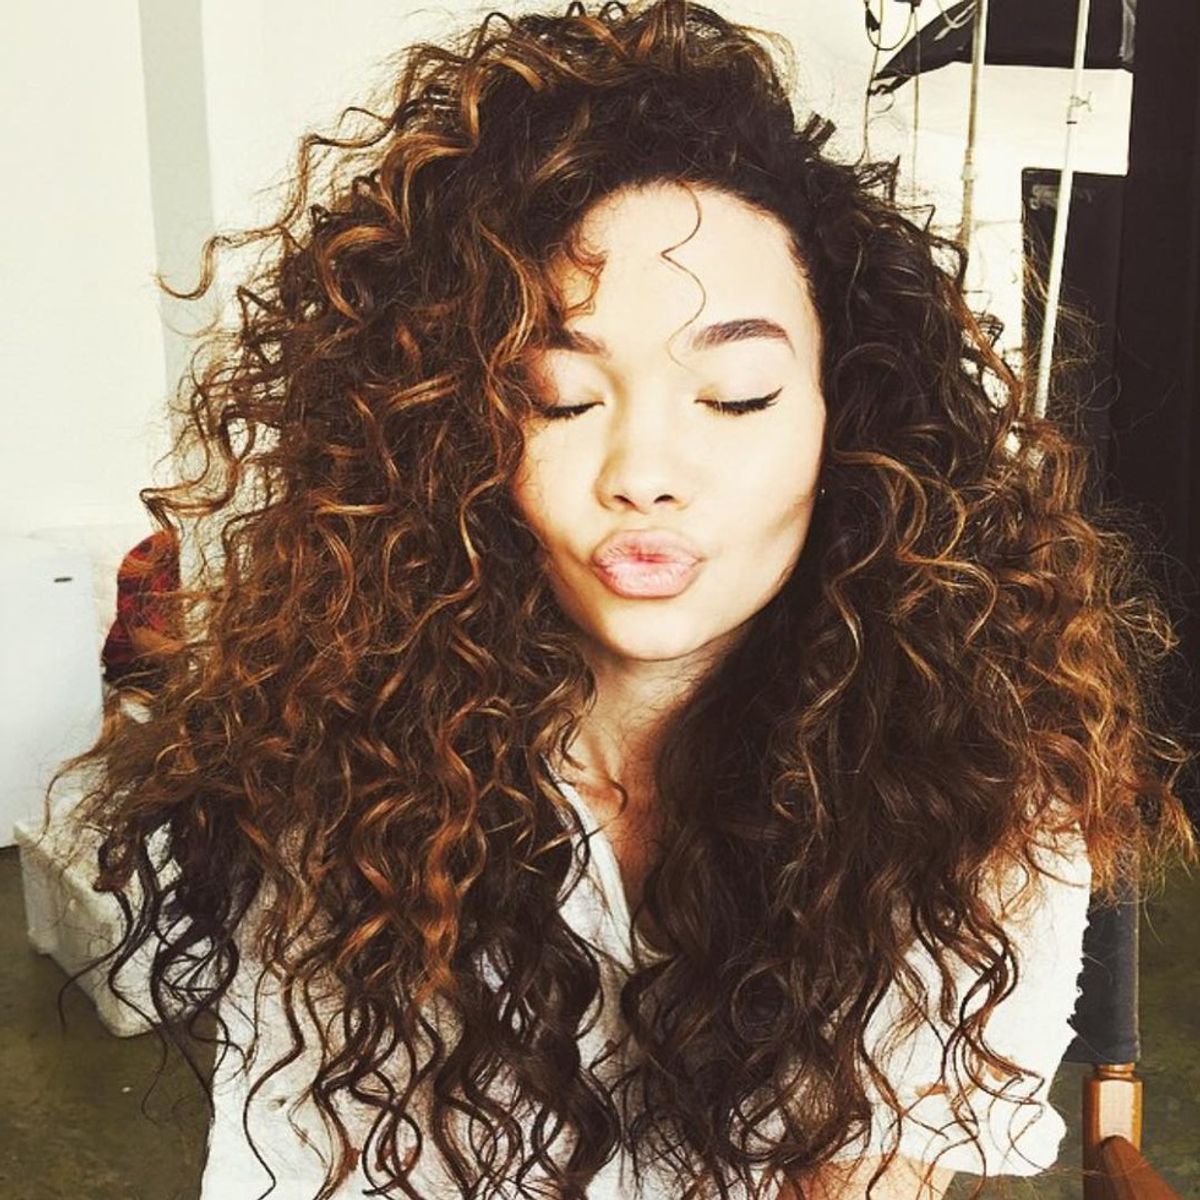 10 Things People With Curly Hair Know All Too Well